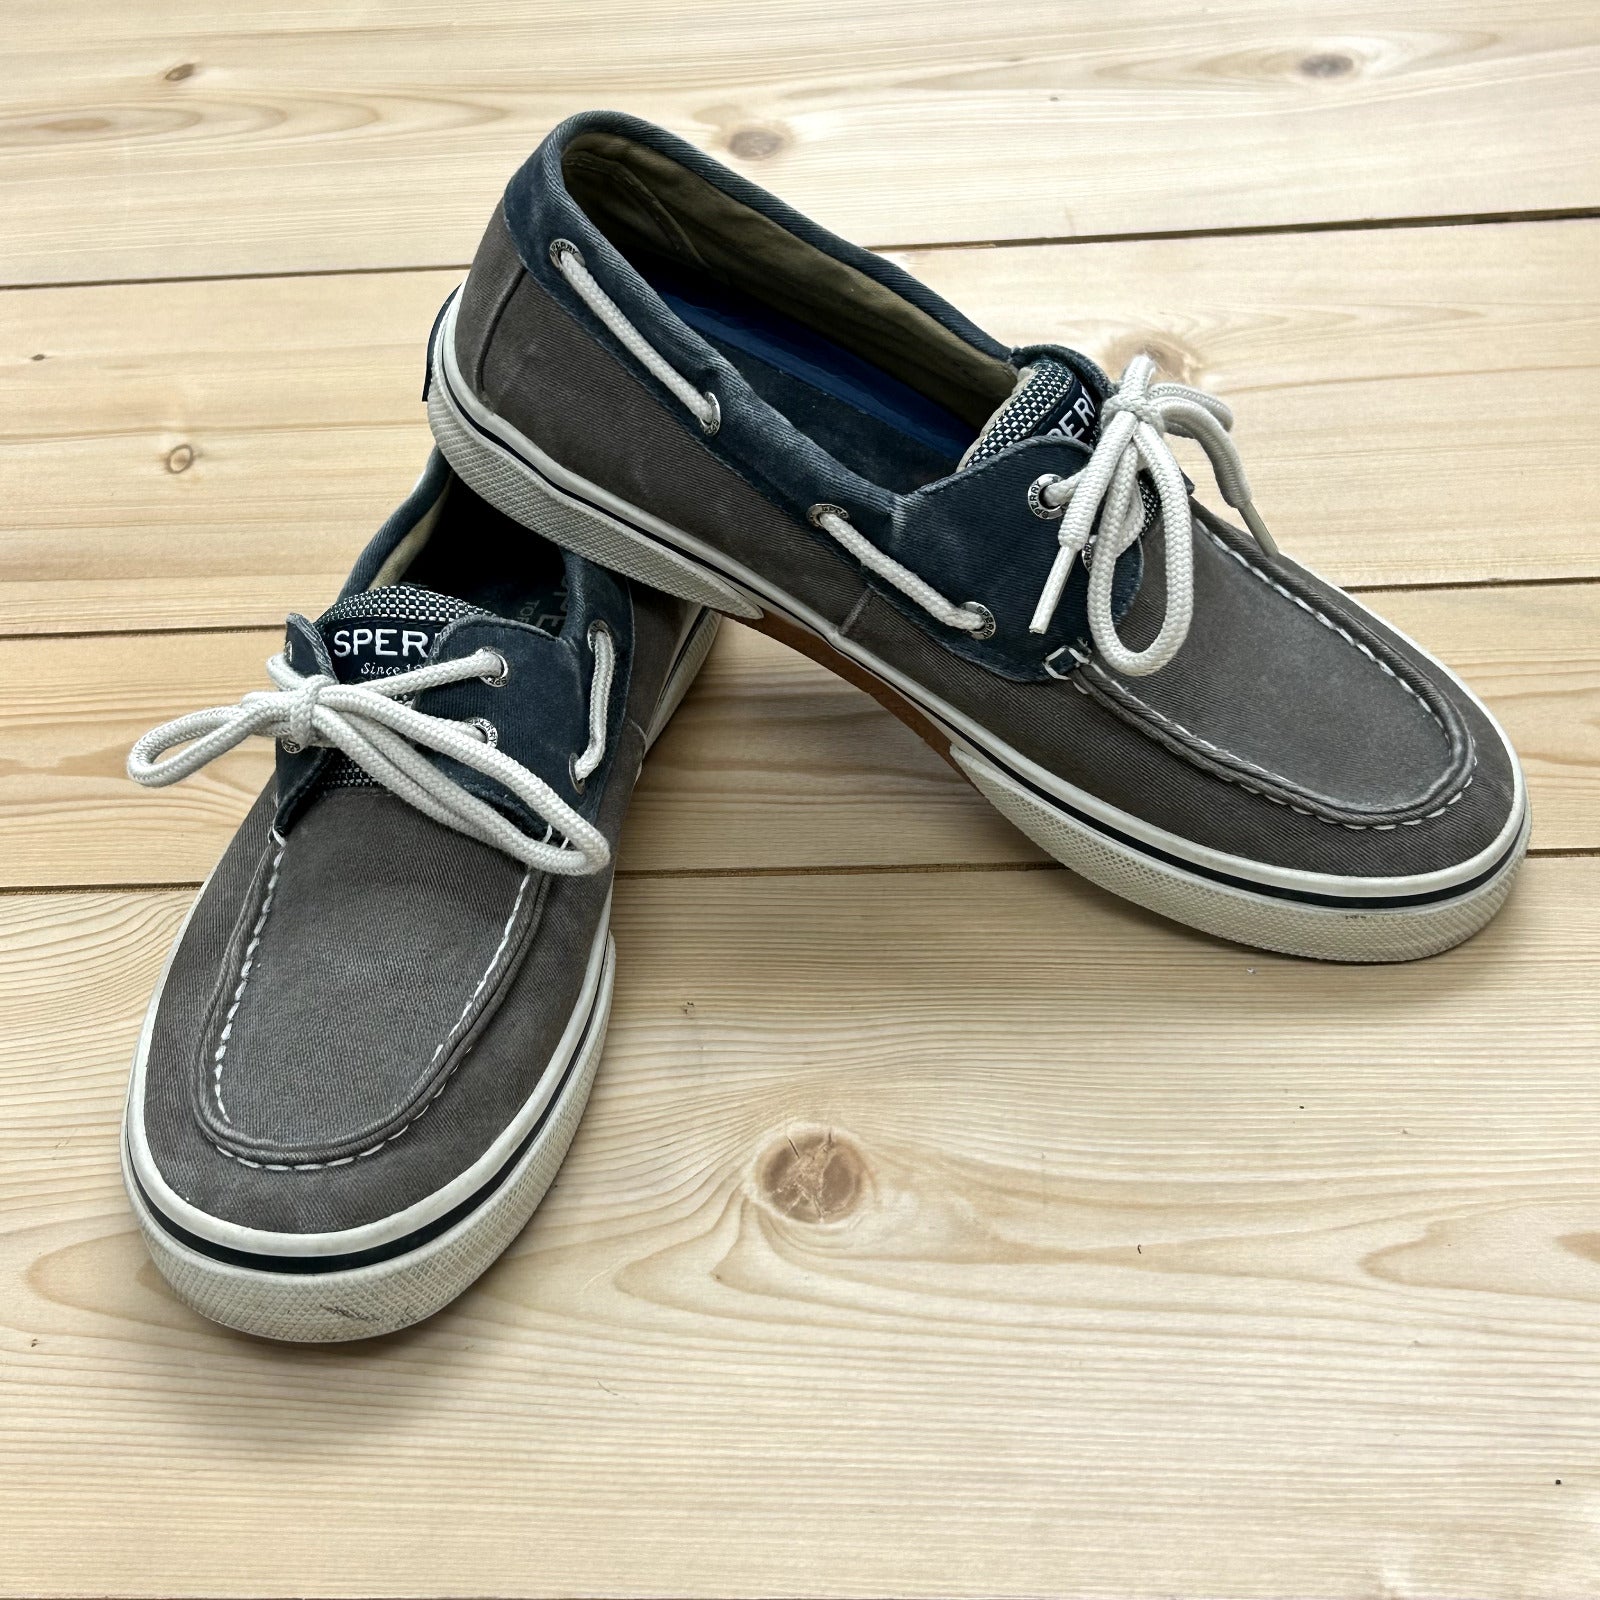 Sperry Halyard Boat Loafers Shoes Mens Size 9 M Gray Navy Slip on Laces STS13964